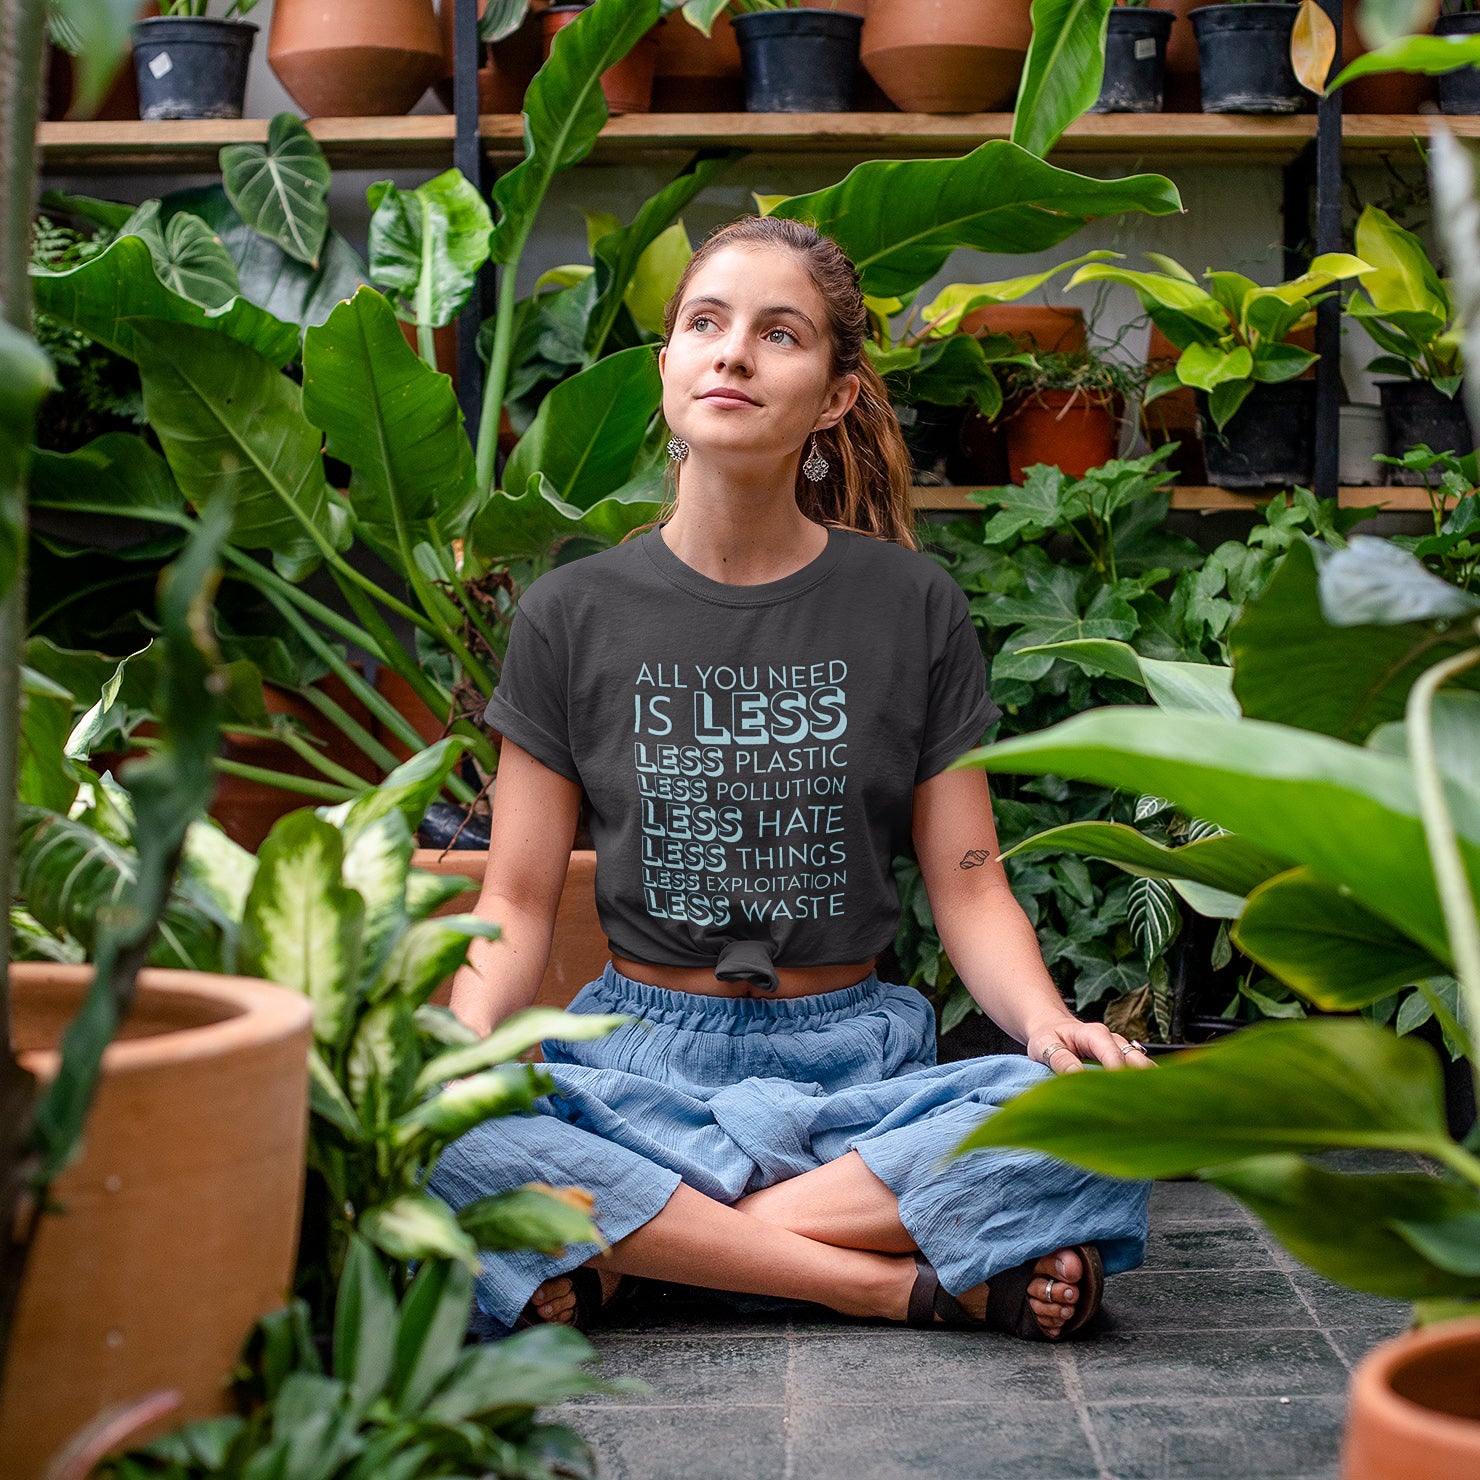 girl in greenhouse surrounded by plants wearing gray getpinkfit "All You Need Is Less" shirt - getpinkfit donated 10% of profits to non-profit organizations - ethically and sustainably made clothing